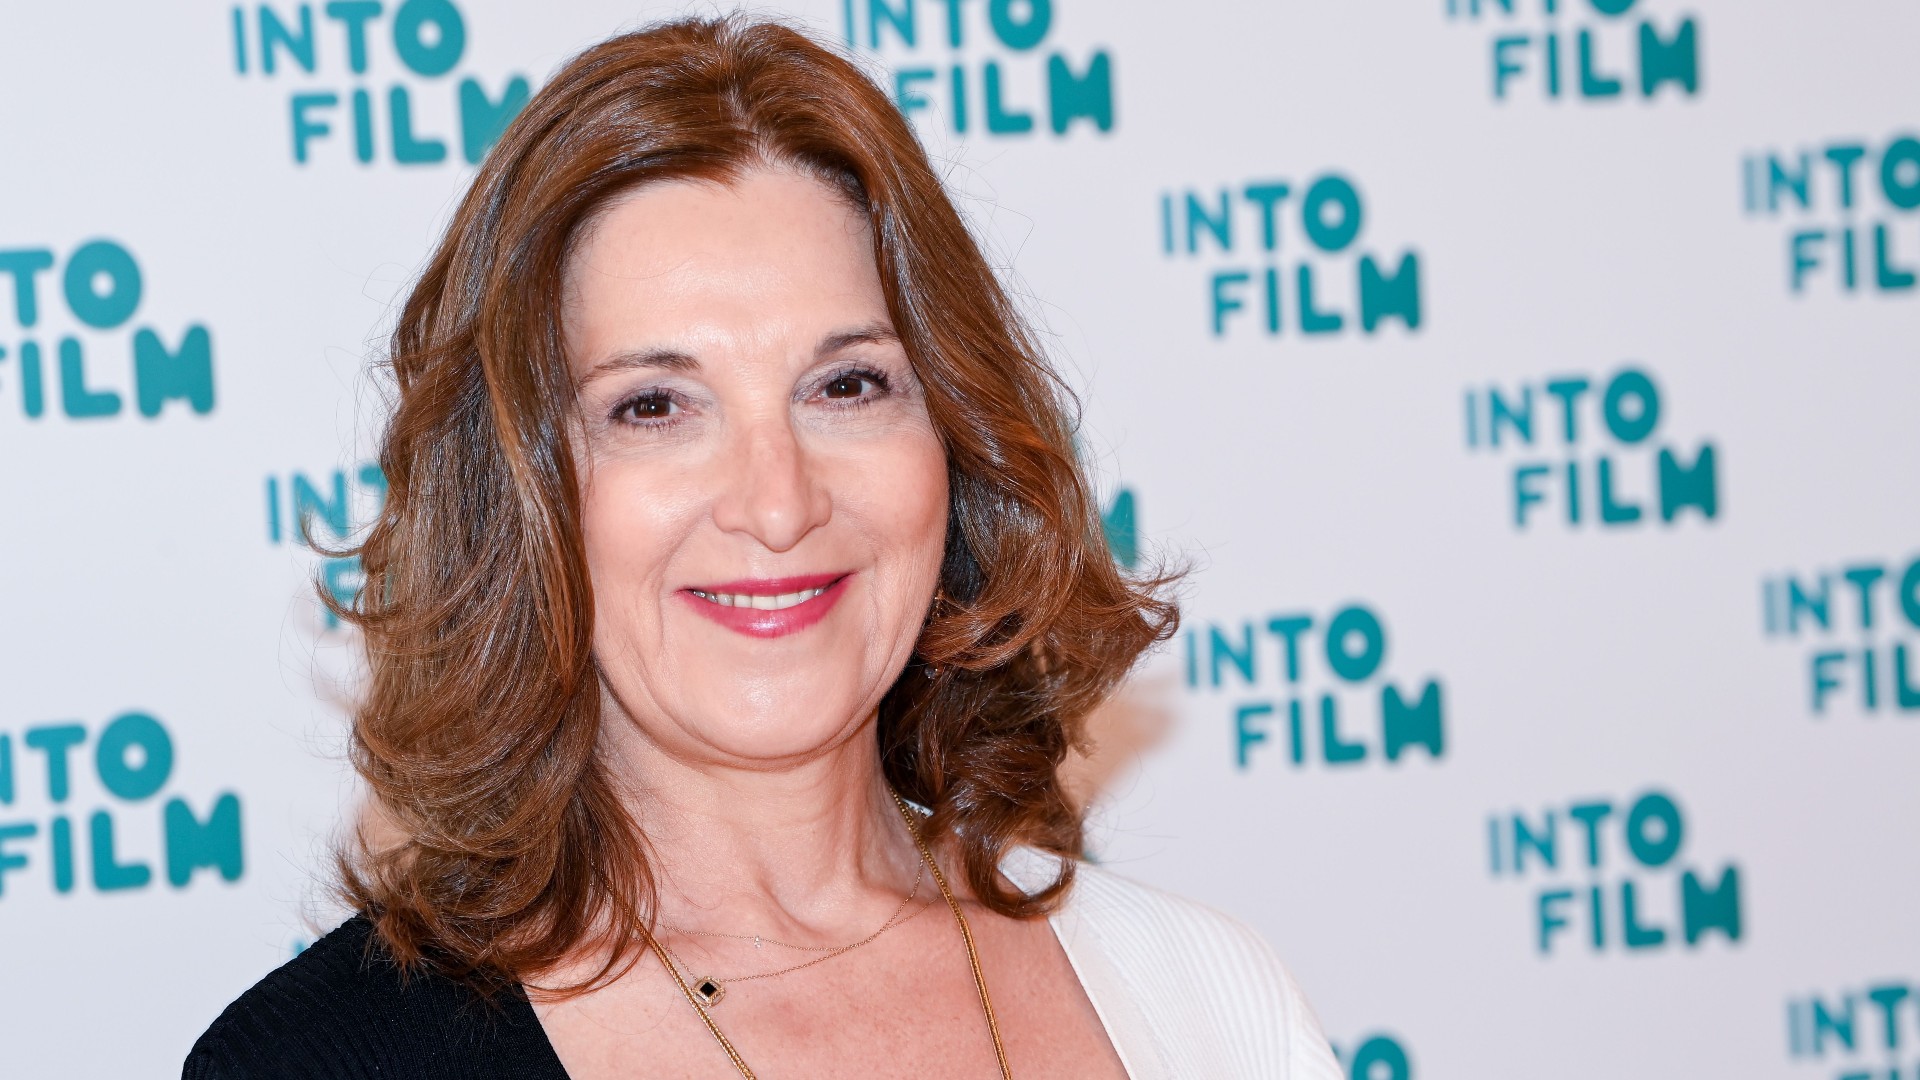 Barbara Broccoli Says Bond Is Being 'Reinvented' for the Next Movie